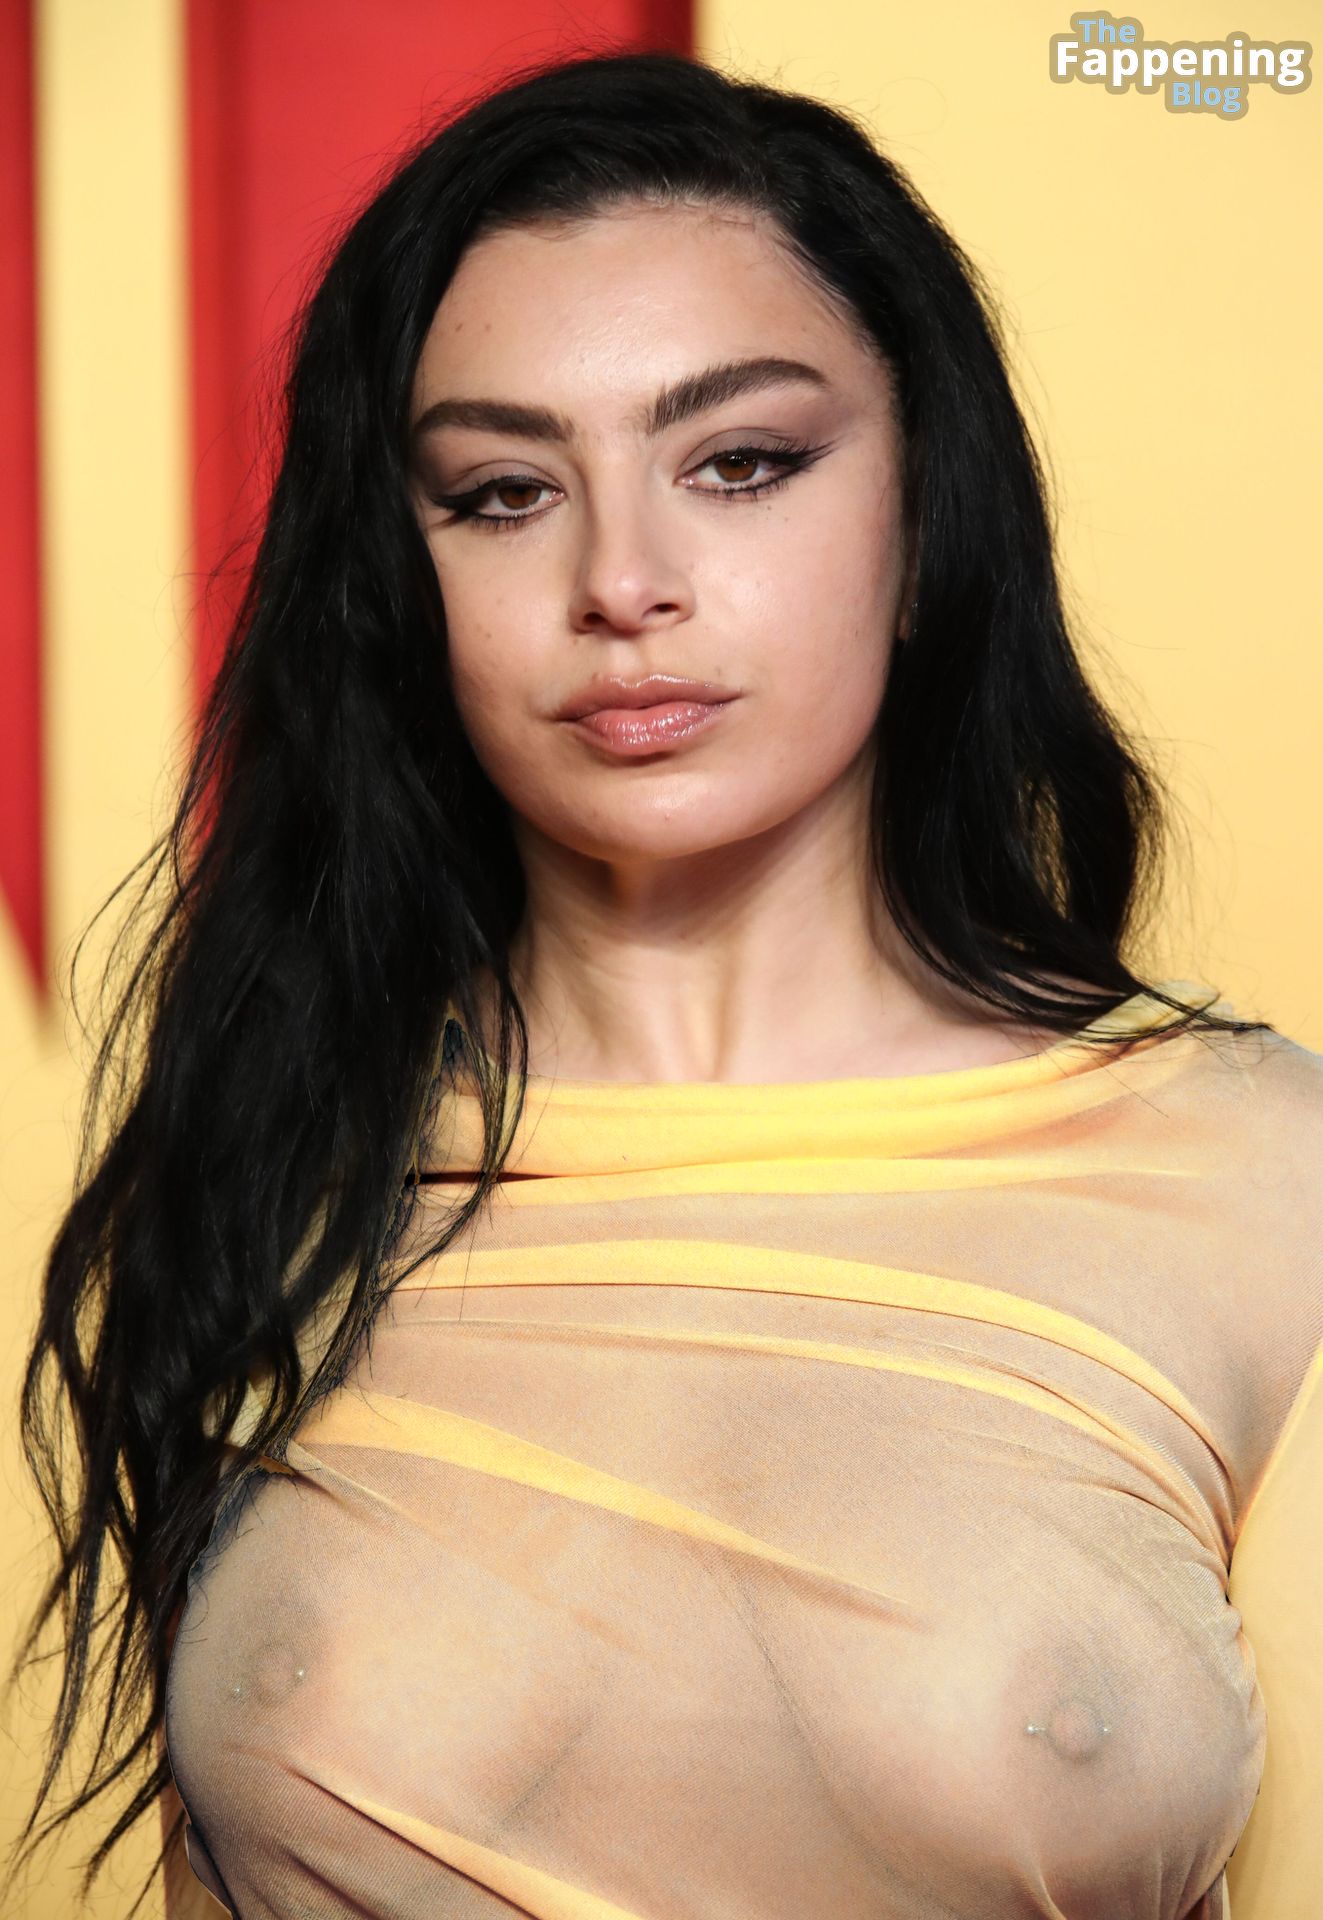 Charli-XCX-Nude-Sexy-16-The-Fappening-Blog.jpg